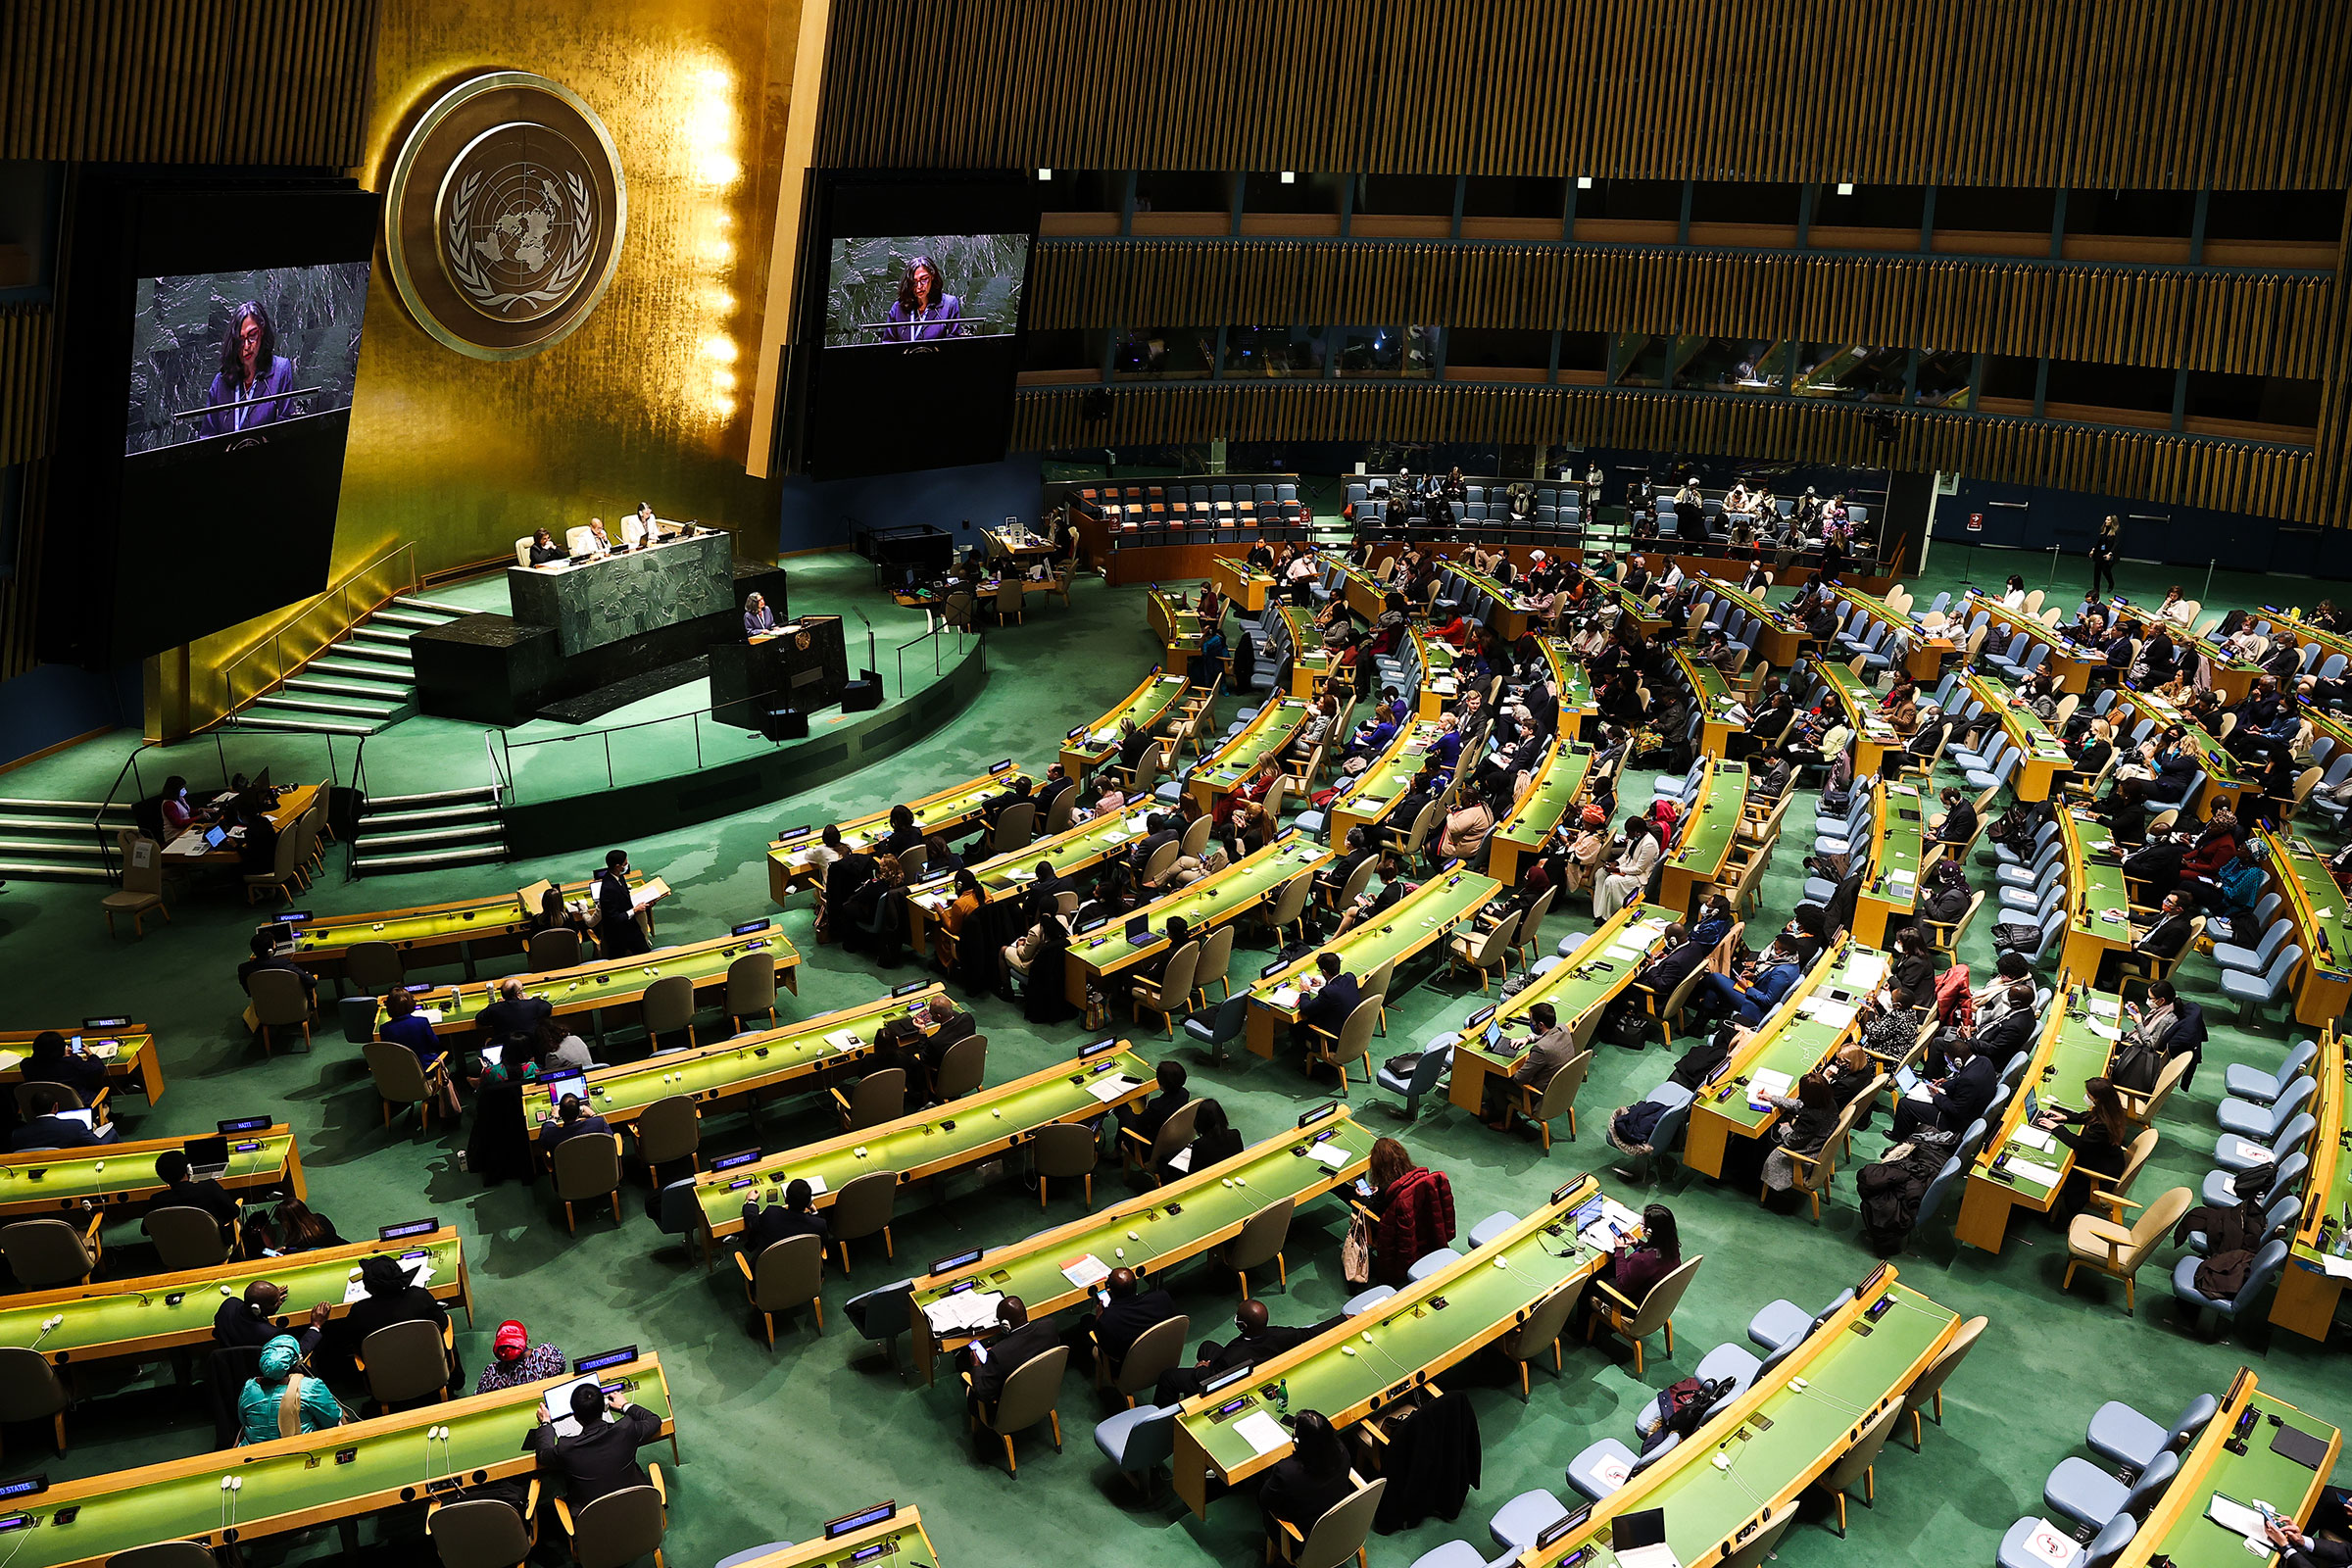 The 66th session of the 'Commission on the Status of Women' is held at the UN headquarters in New York City, on March 14, 2022. (Tayfun Coskun—Anadolu Agency/Getty Images)